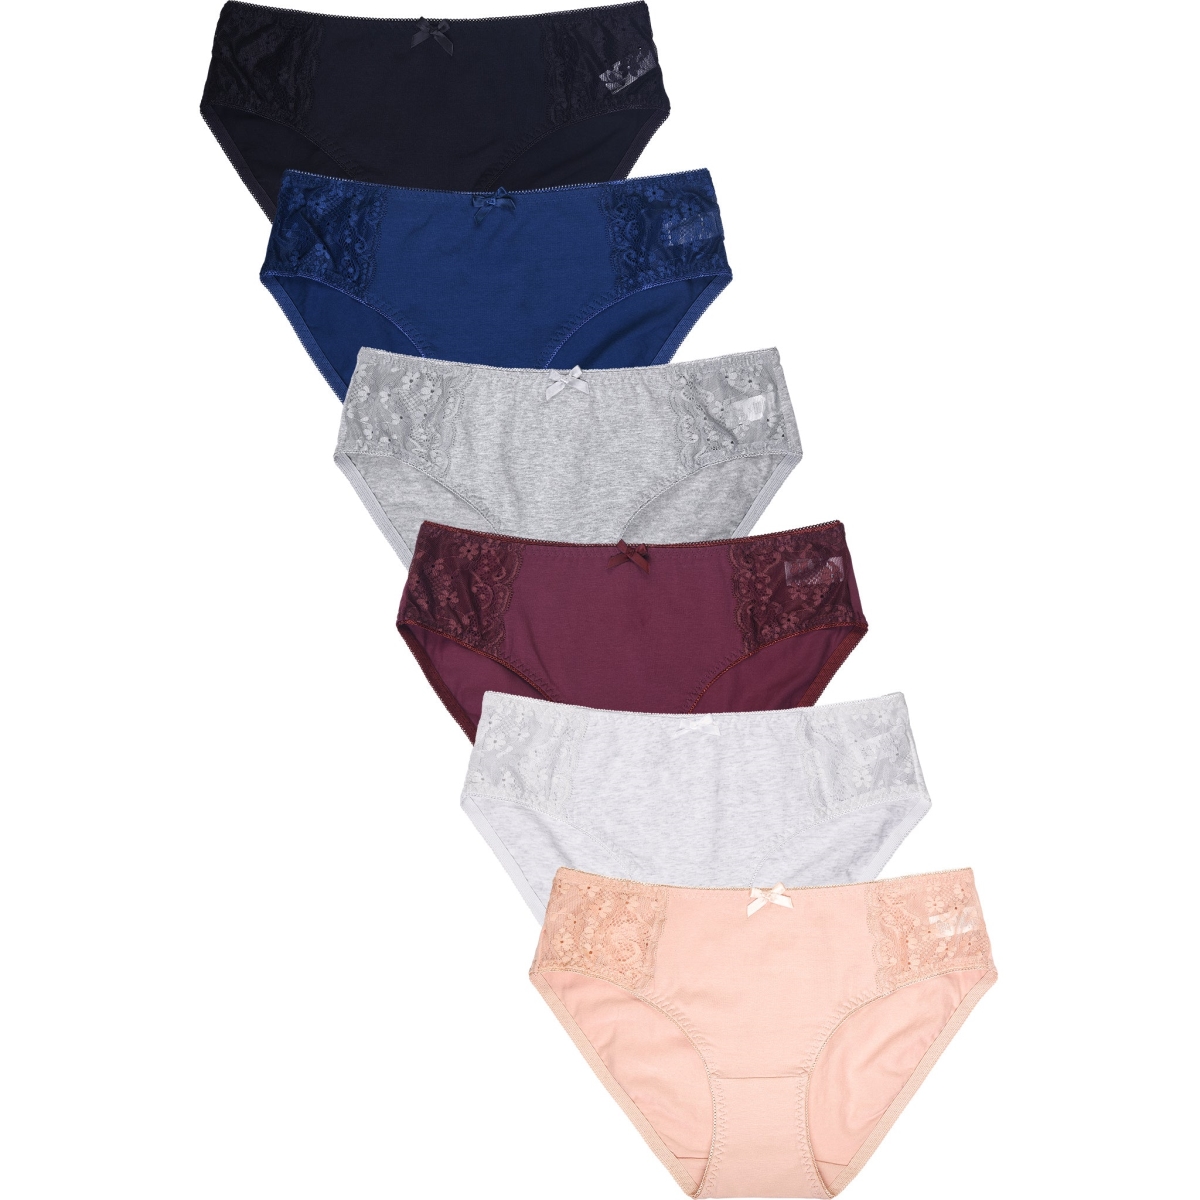 Picture of 247 Frenzy 247-LP1426CK-LG Sofra Womens Essentials Cotton Stretch Bikini Panty Underwear - Assorted Color - Large - Pack of 6